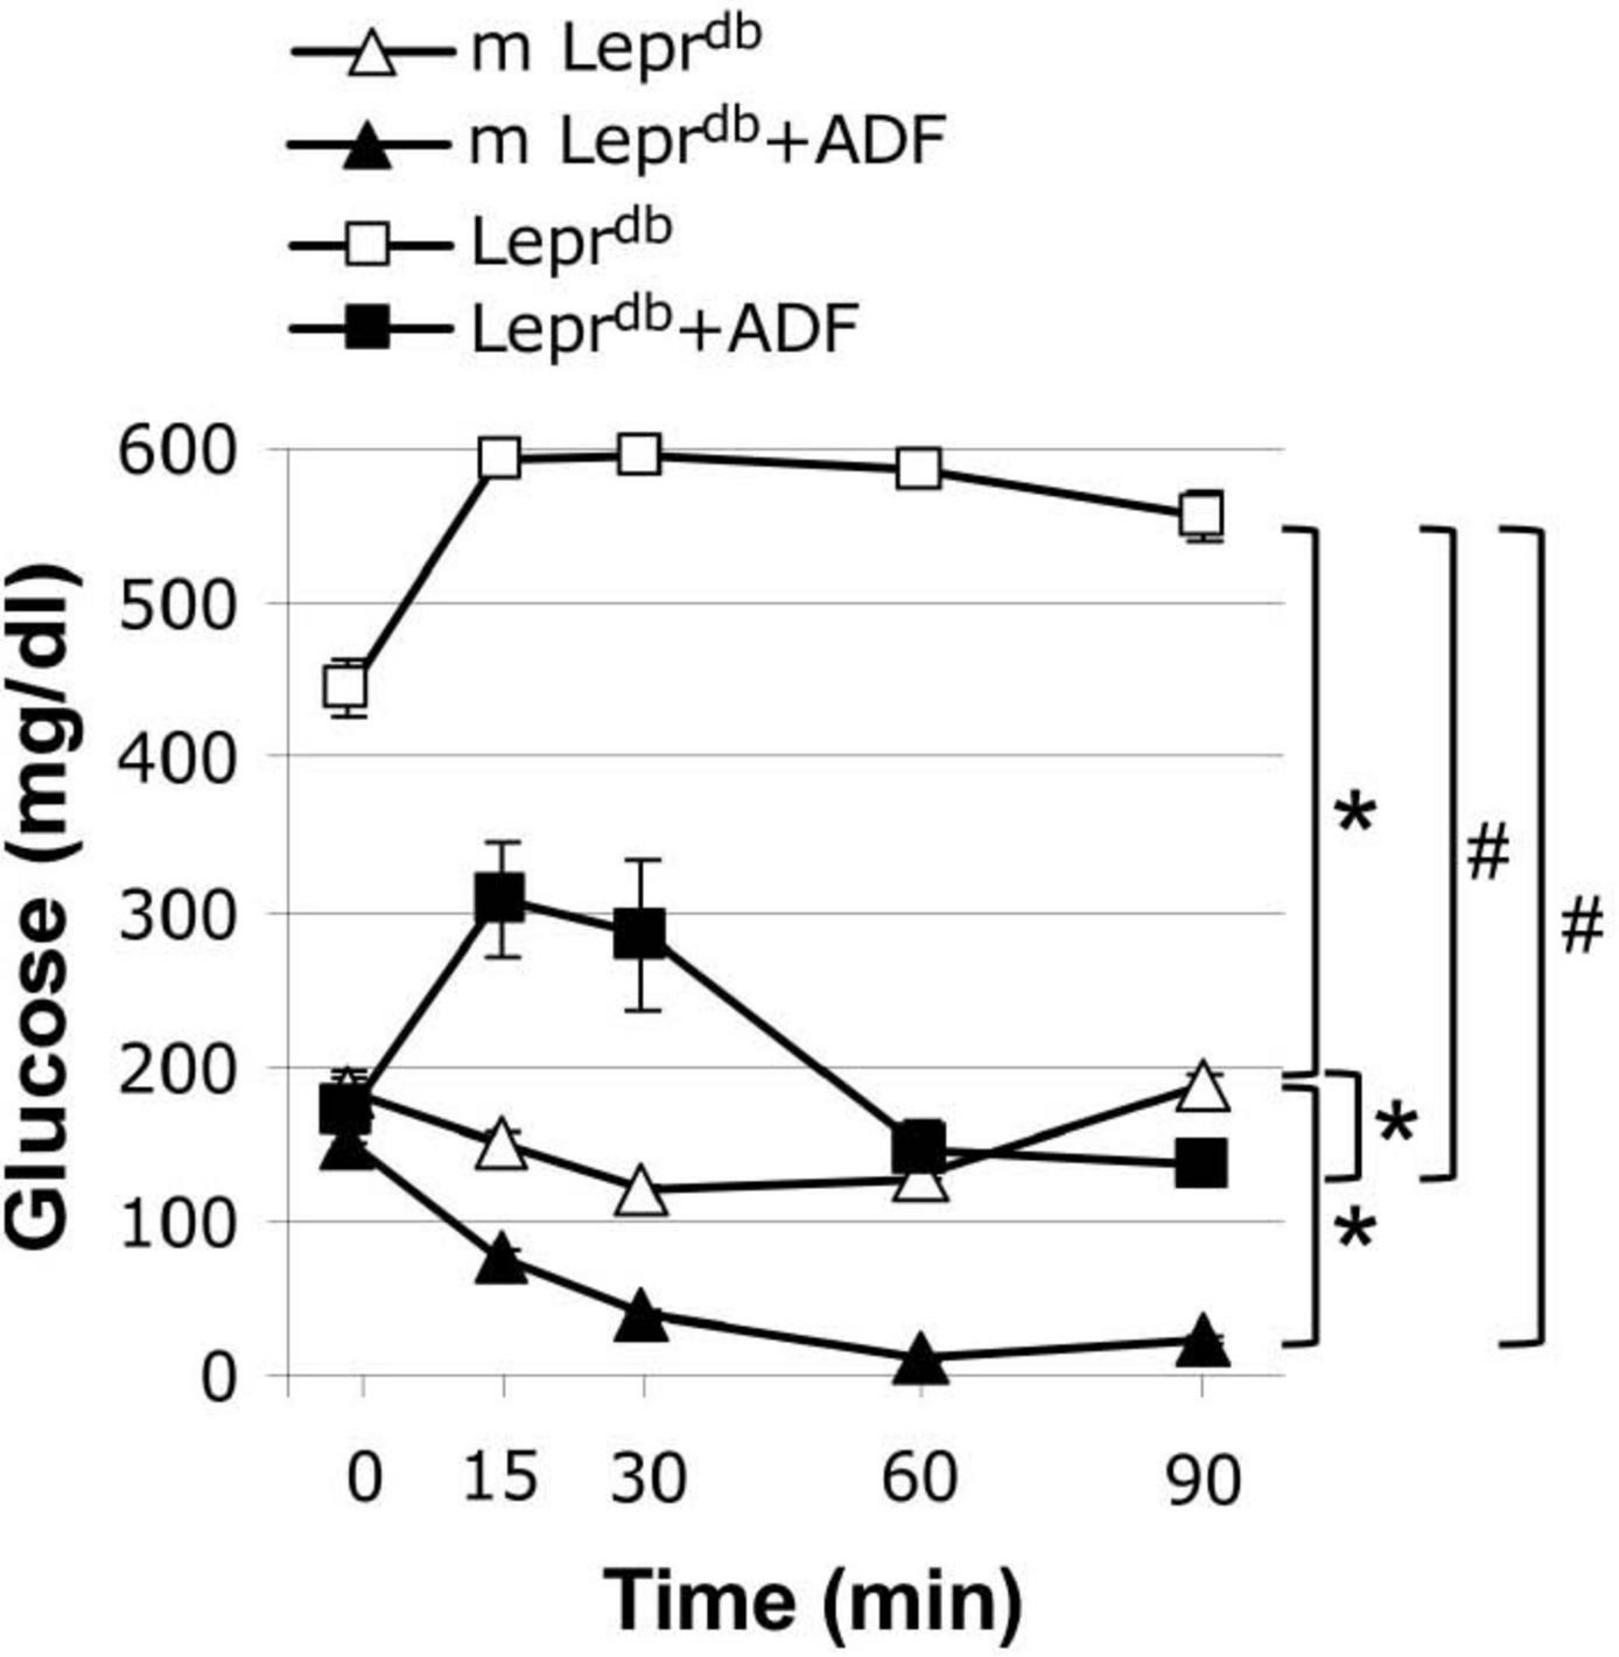 Frontiers  Alternate Day Fasting Improves Endothelial Function in Type 2  Diabetic Mice: Role of Adipose-Derived Hormones